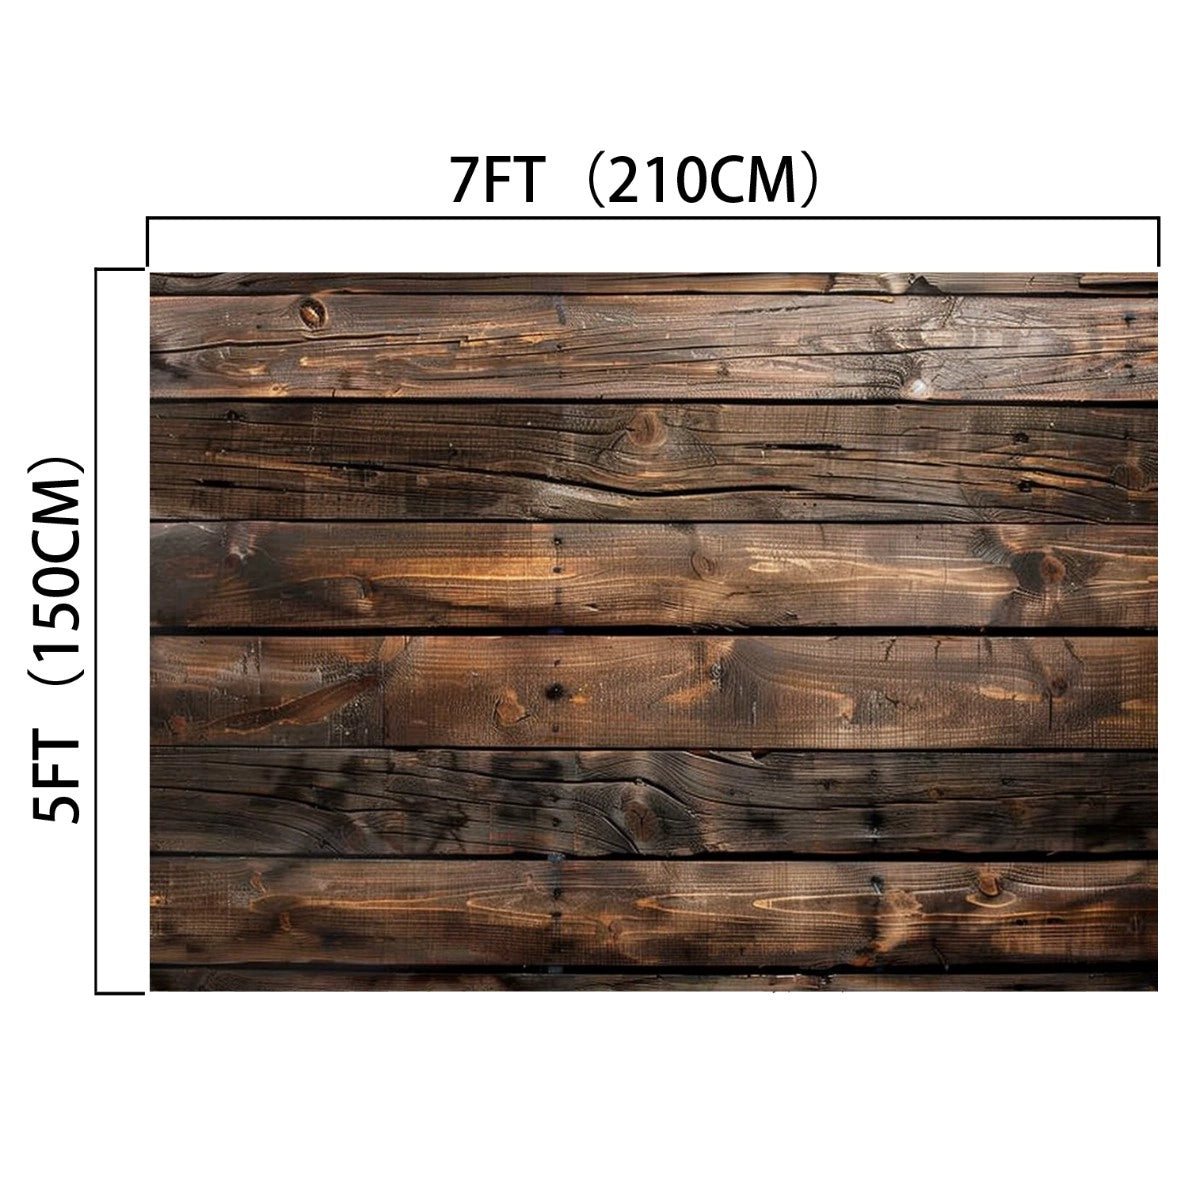 A Brown Wood Backdrop Photographers for Birthday Baby Shower Background Photo Booth Video Shoot Studio Prop by ideasbackdrop measuring 7 feet (210 cm) by 5 feet (150 cm), featuring horizontal wooden planks with a dark brown finish, makes an ideal wood wall backdrop for photography props.